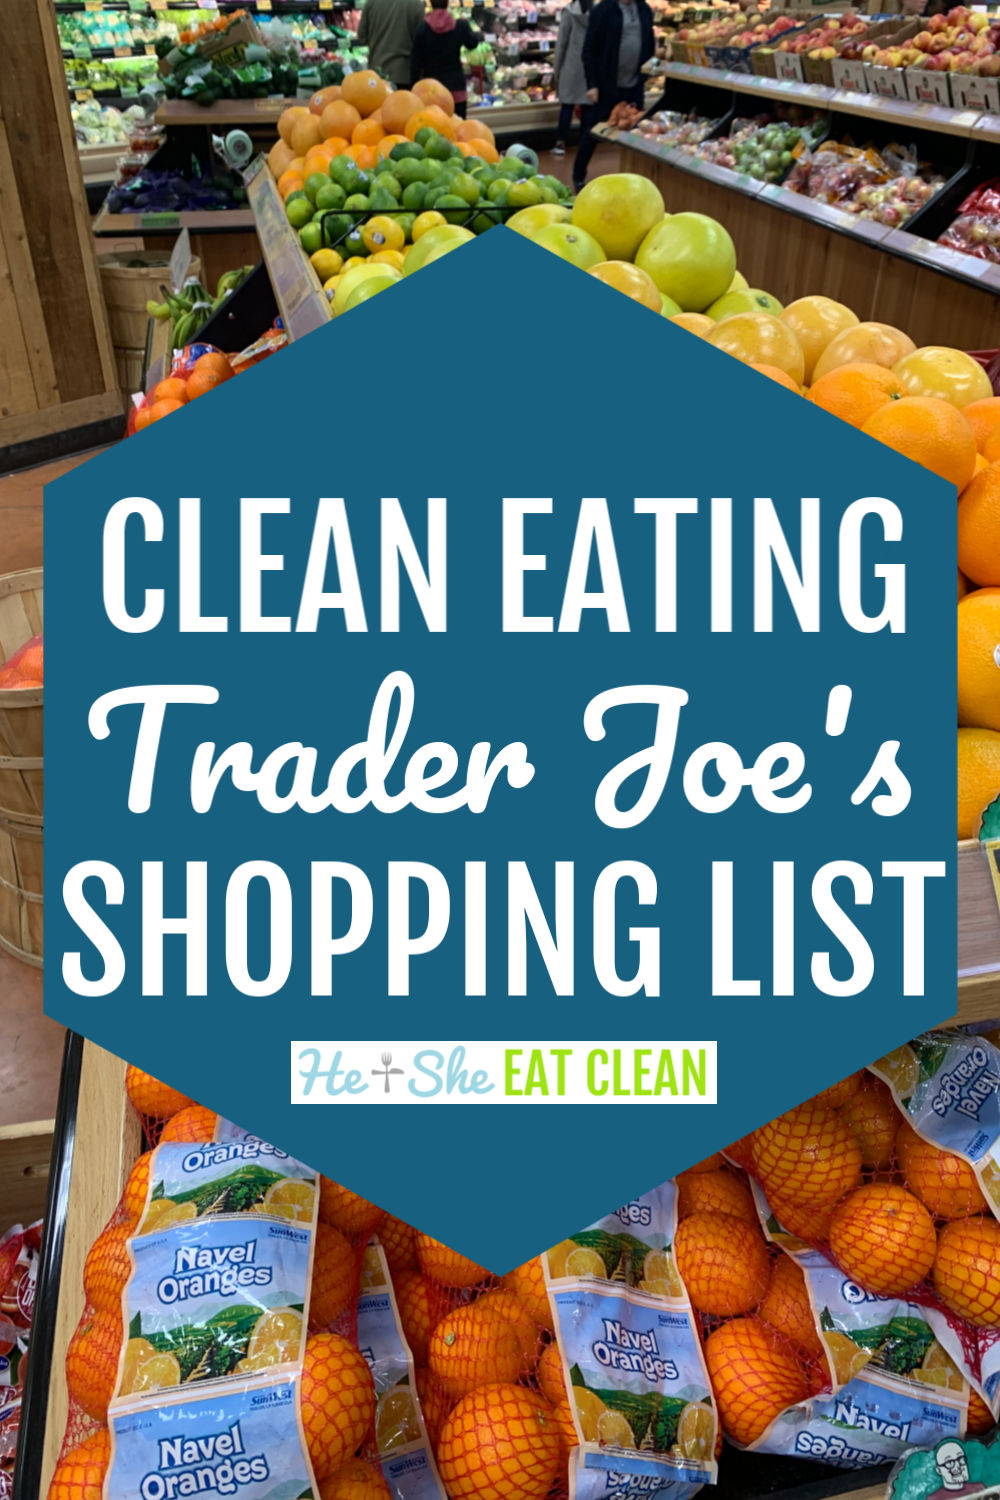 https://www.heandsheeatclean.com/wp-content/uploads/2020/01/Trader-Joes-Clean-Eating-Shopping-List-He-and-She-Eat-Clean.jpg